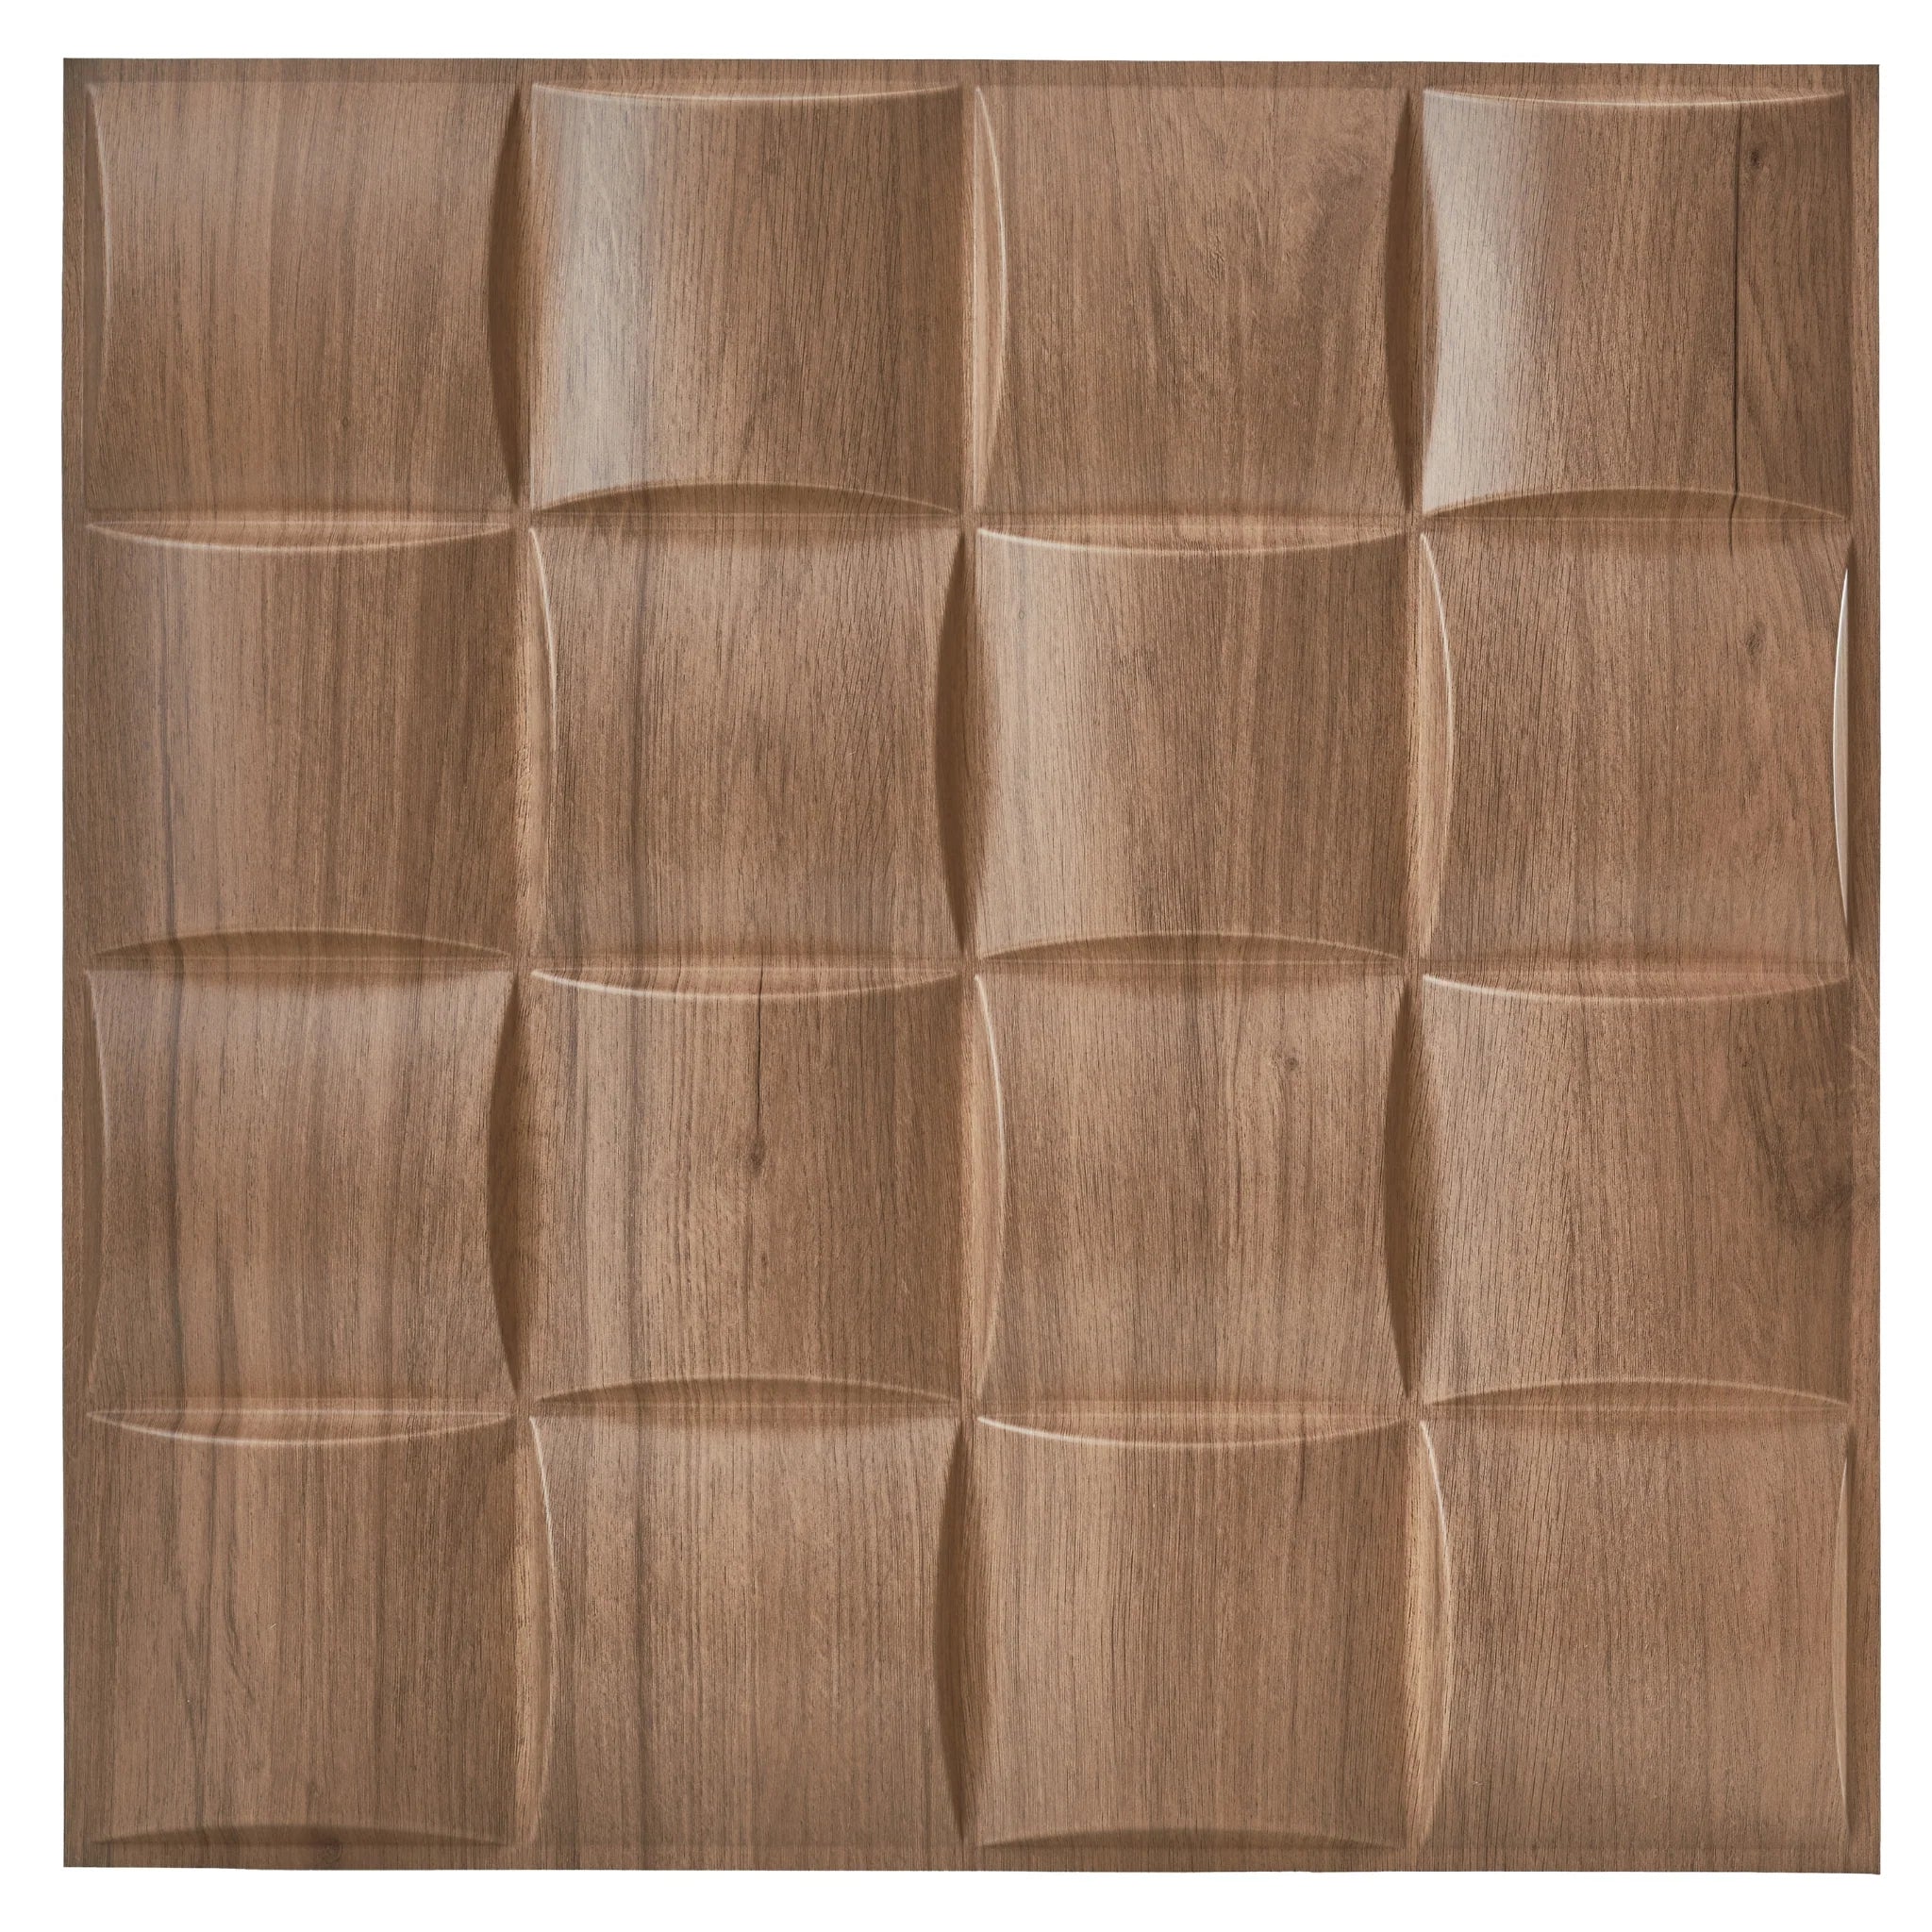 Wooden PVC wall panel with curved square pattern, 50x50 cm